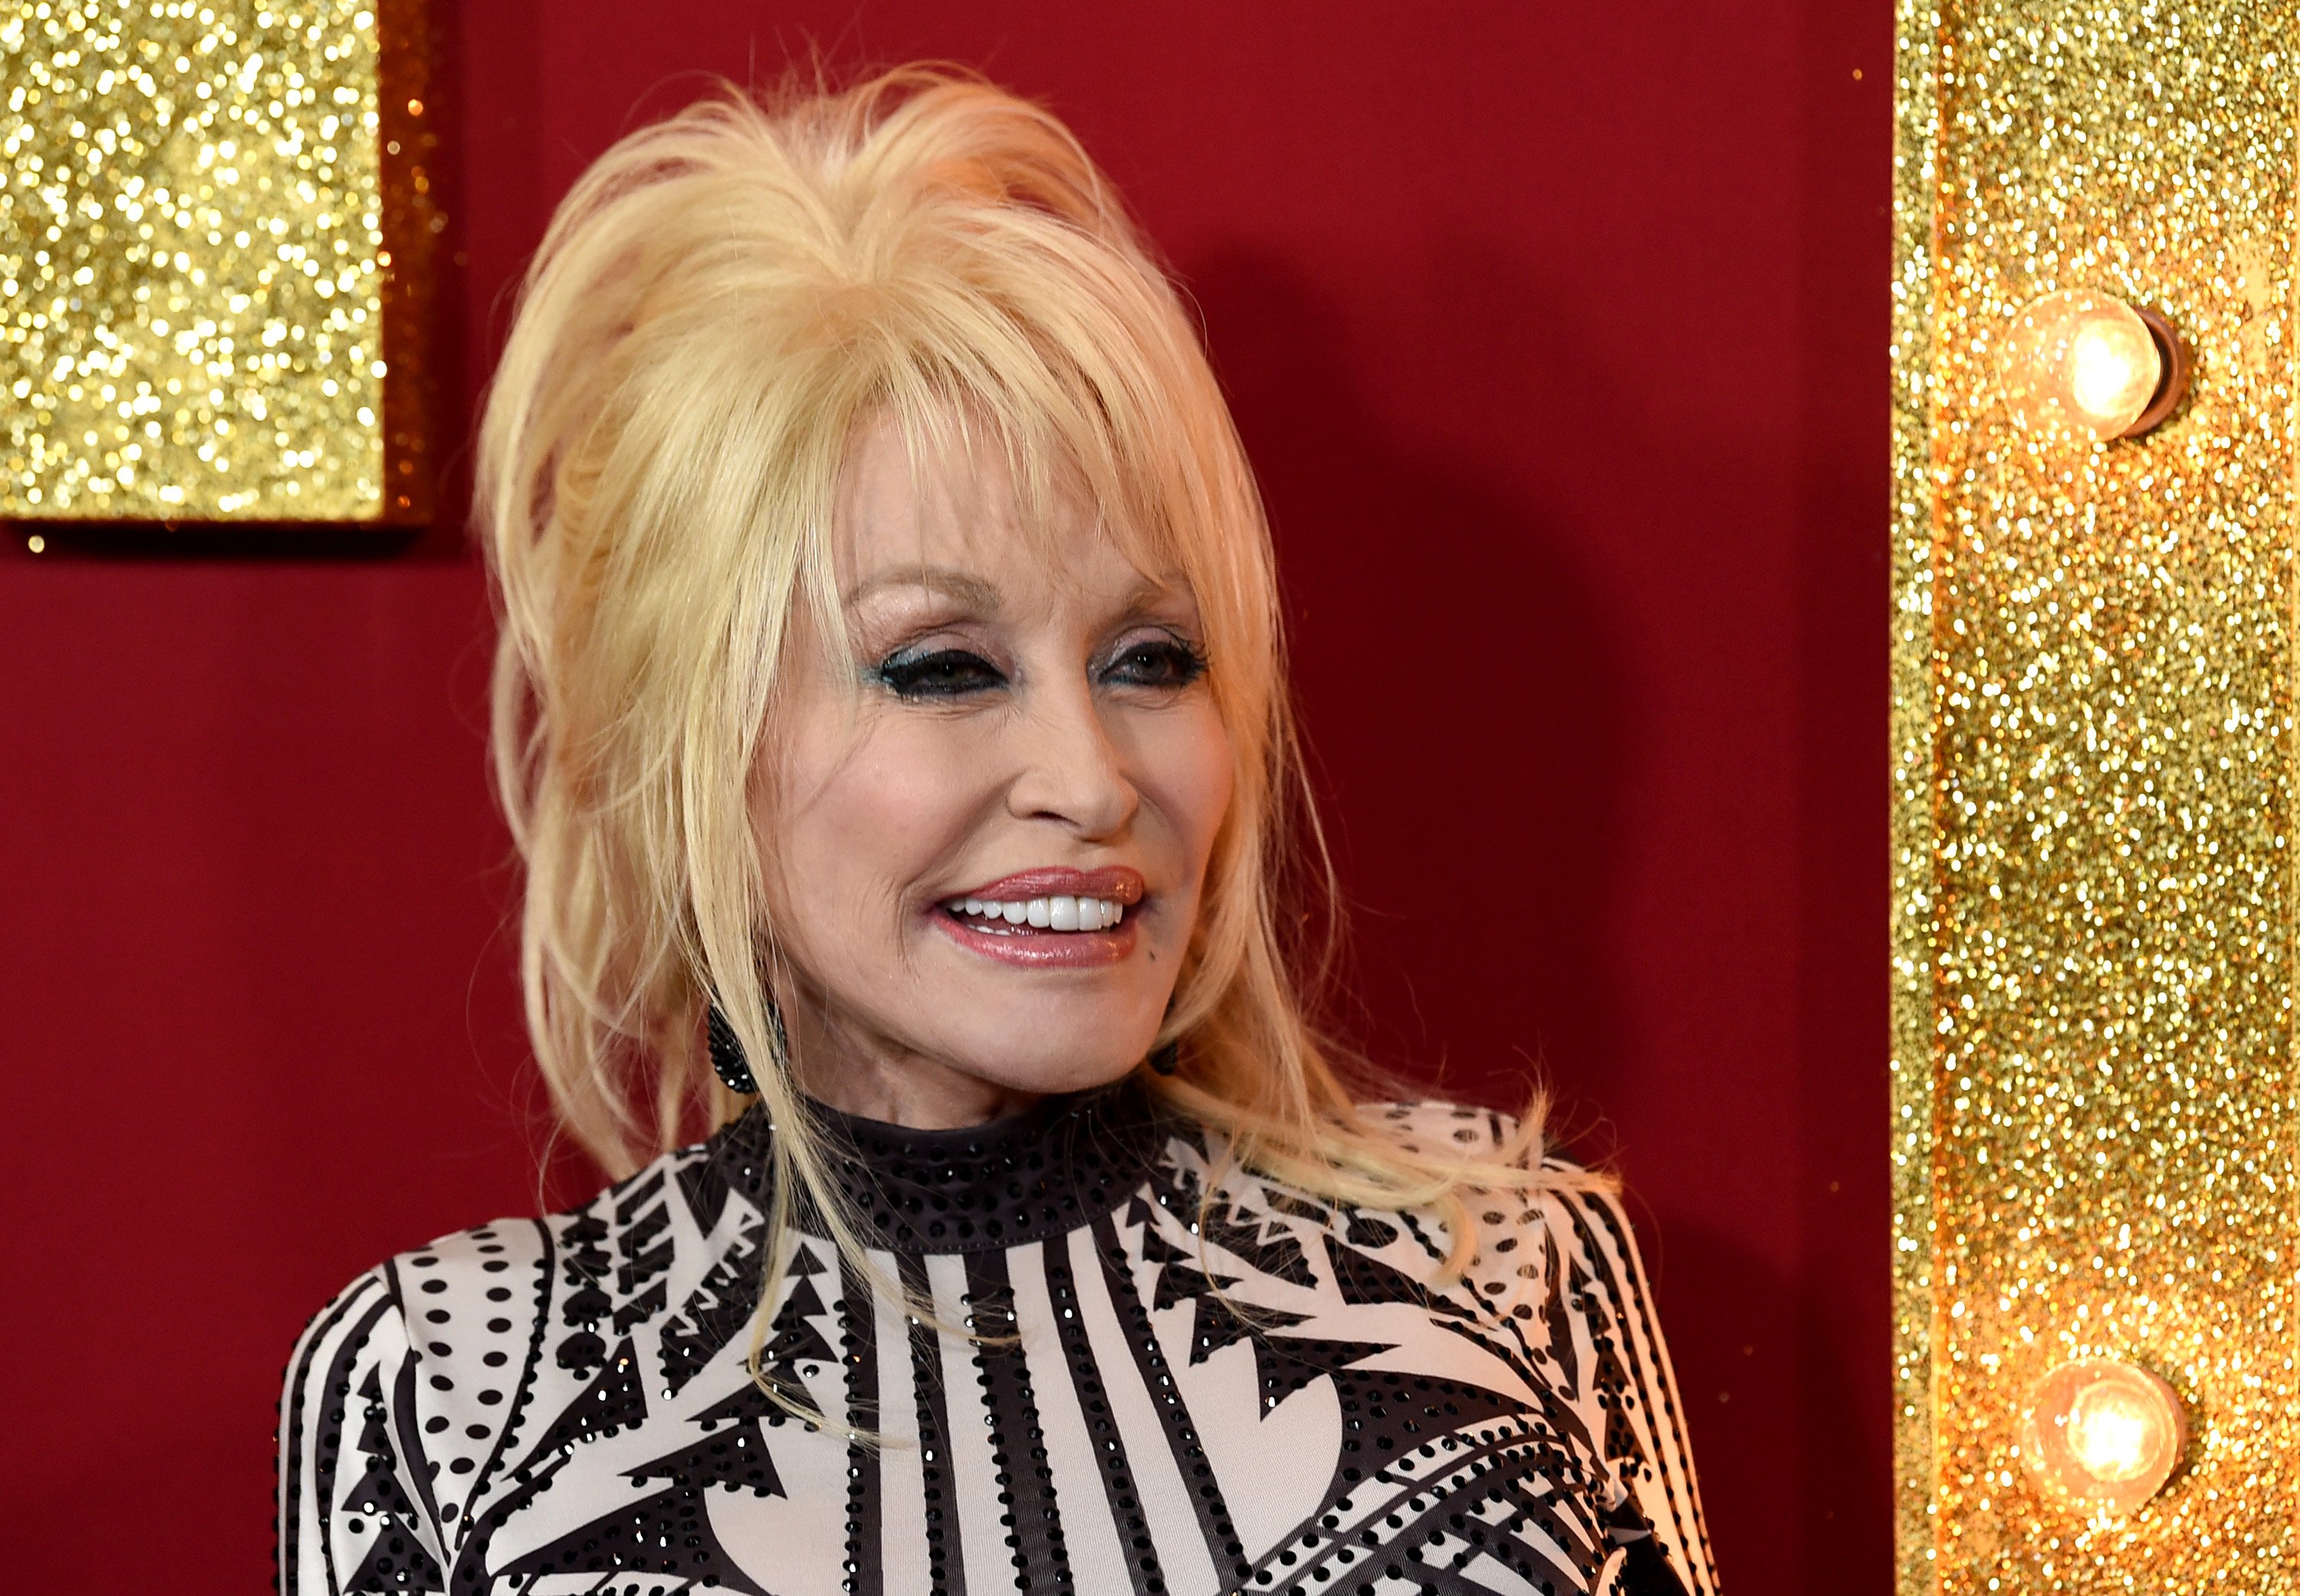 Dolly Parton at the premiere of 'Dumplin'' on the red carpet. She's in a black and white top and looking to the left of the camera, smiling.